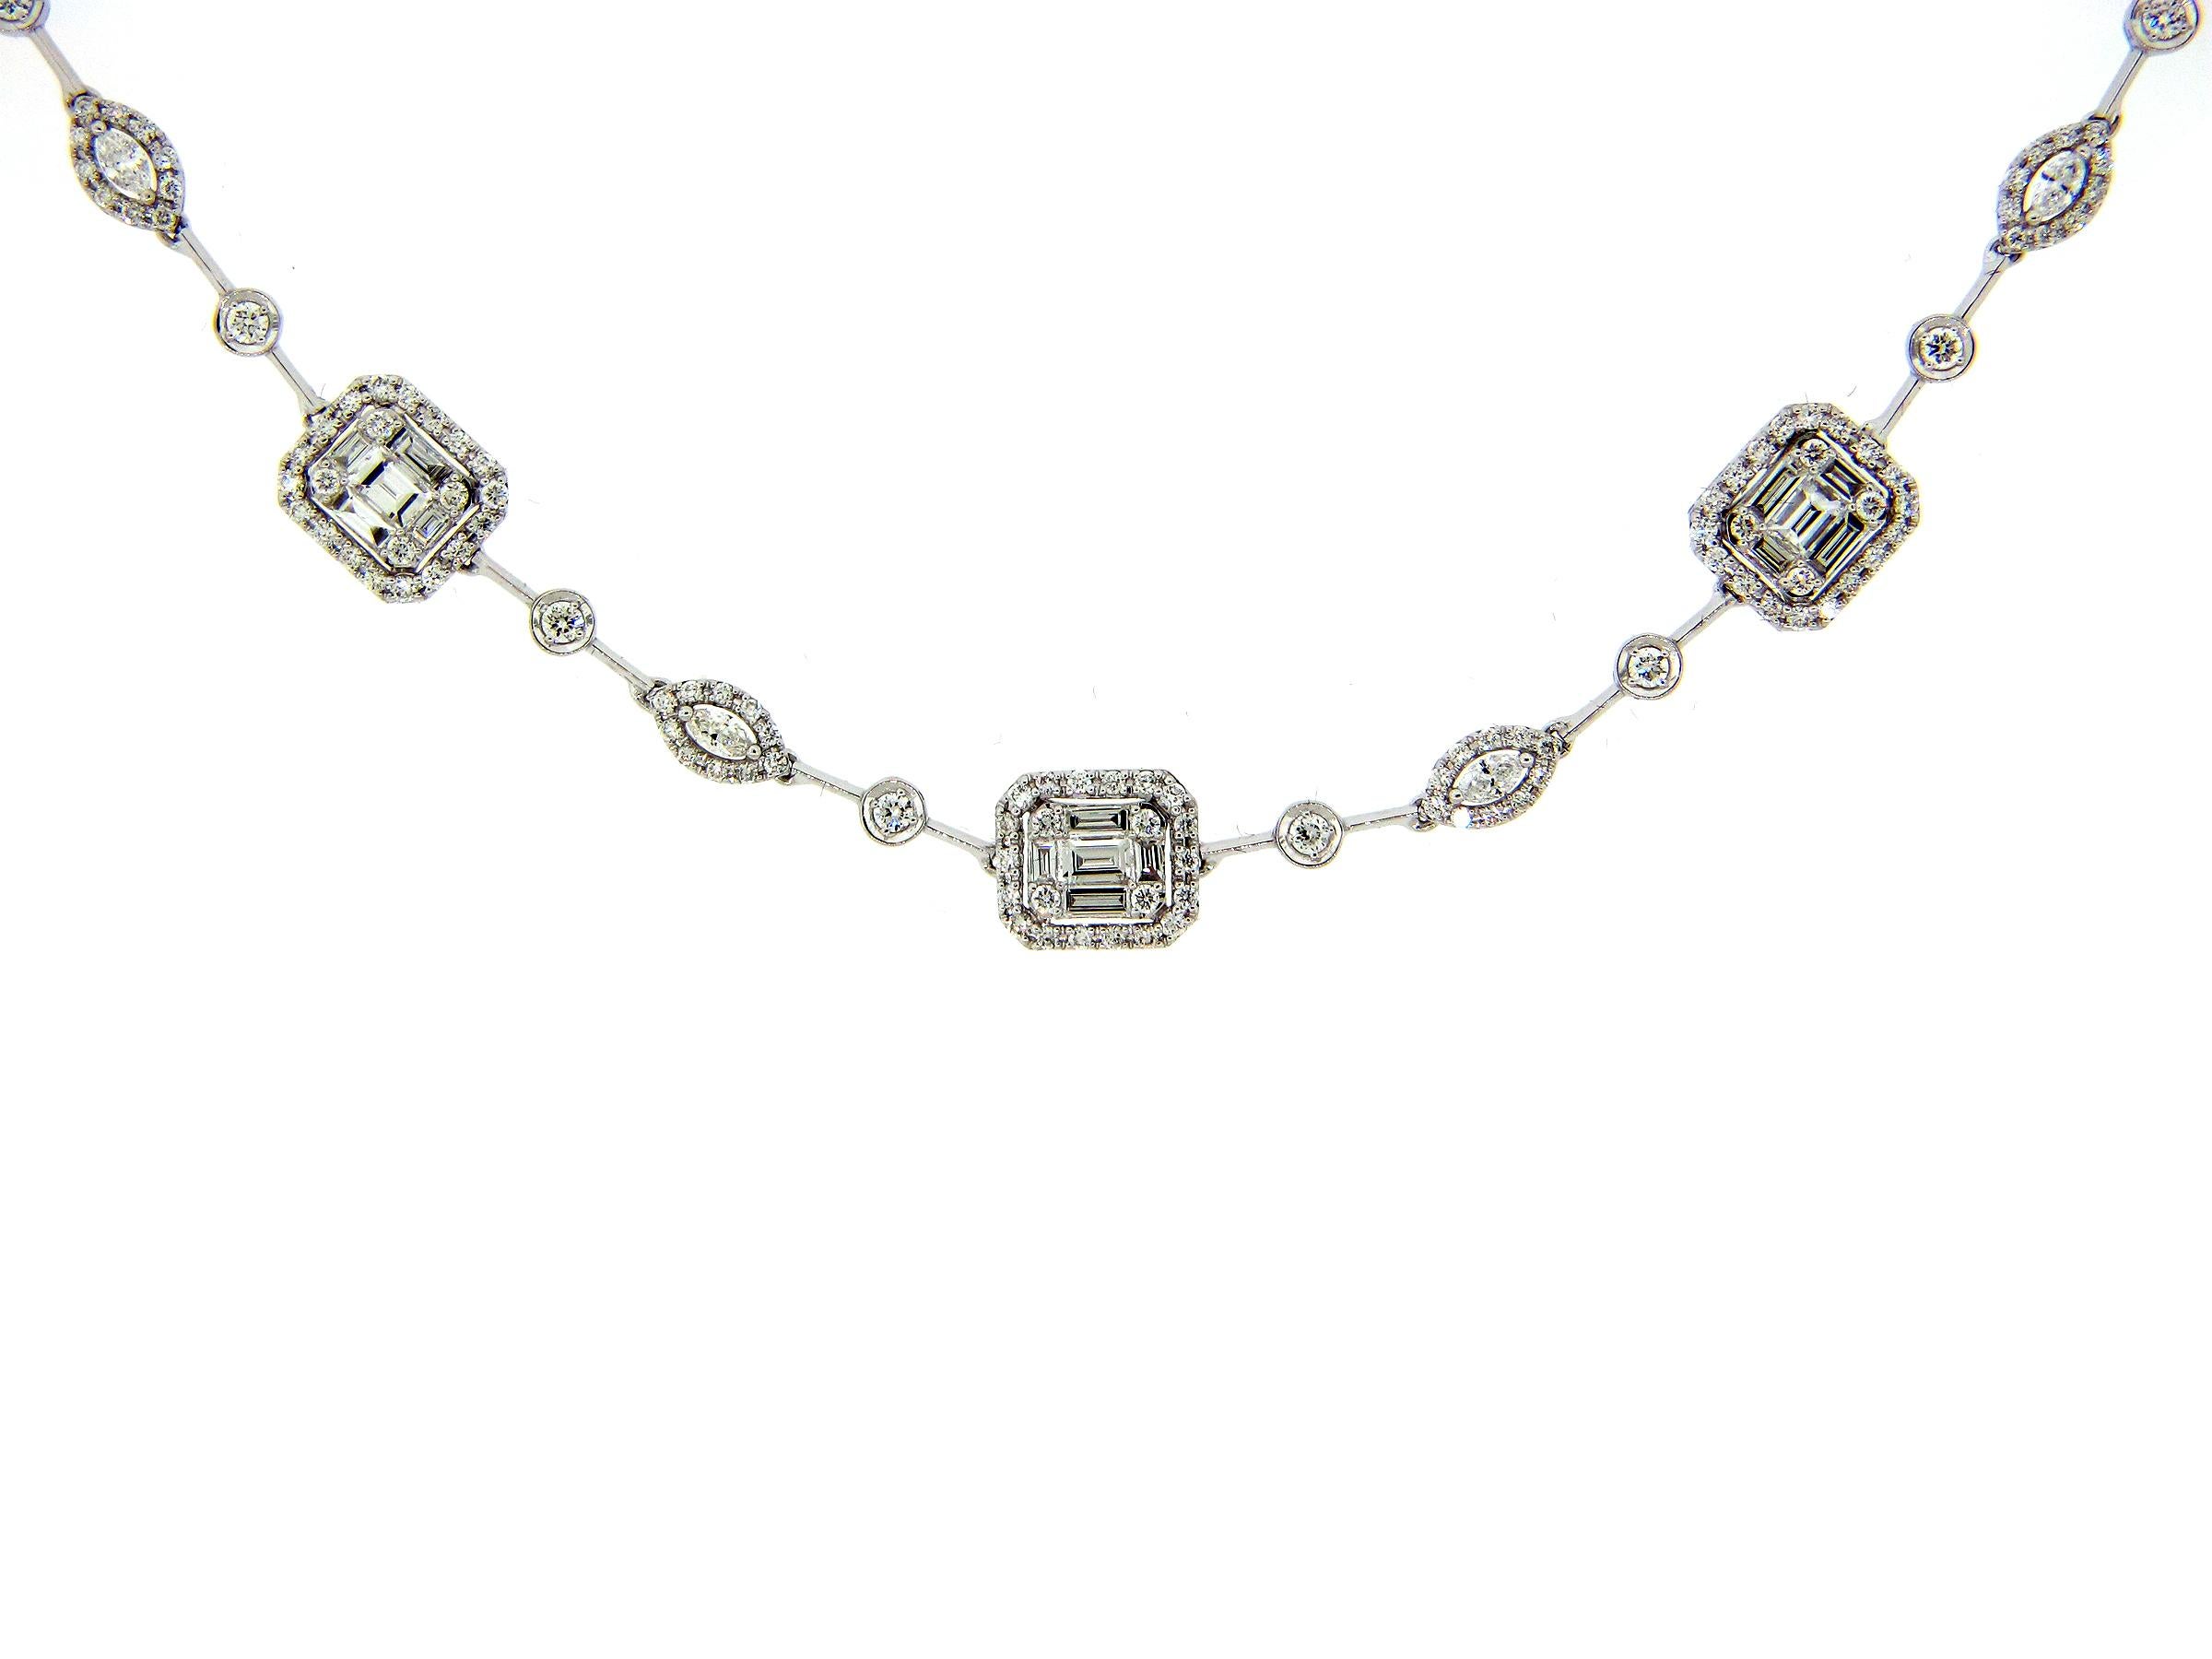 This stunning necklace features 26 emerald cut diamond clusters, each comprising of 5 baguette cut and 4 round diamonds. Each cluster is surrounded by a halo of round white diamonds. This necklace is secured with a hidden clasp and safety lock, and